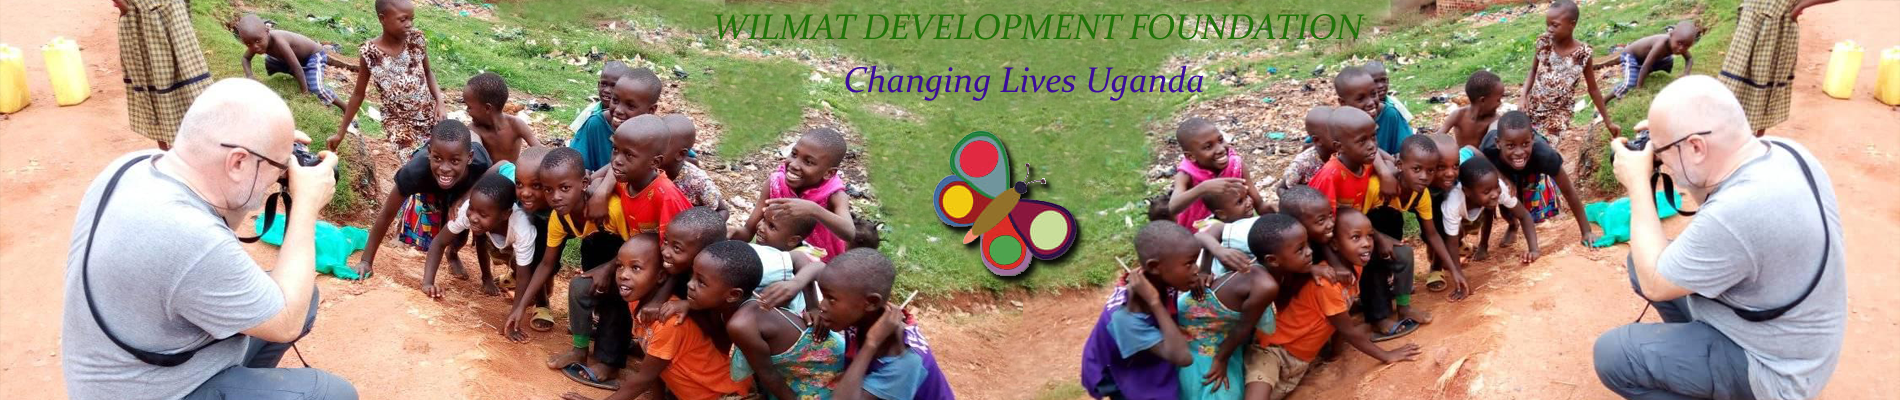 Wilmat Development Foundation - Wilmat Development Foundation is an equal opportunity entity that offers Internship placements to both National and International university, high school students all around the world.